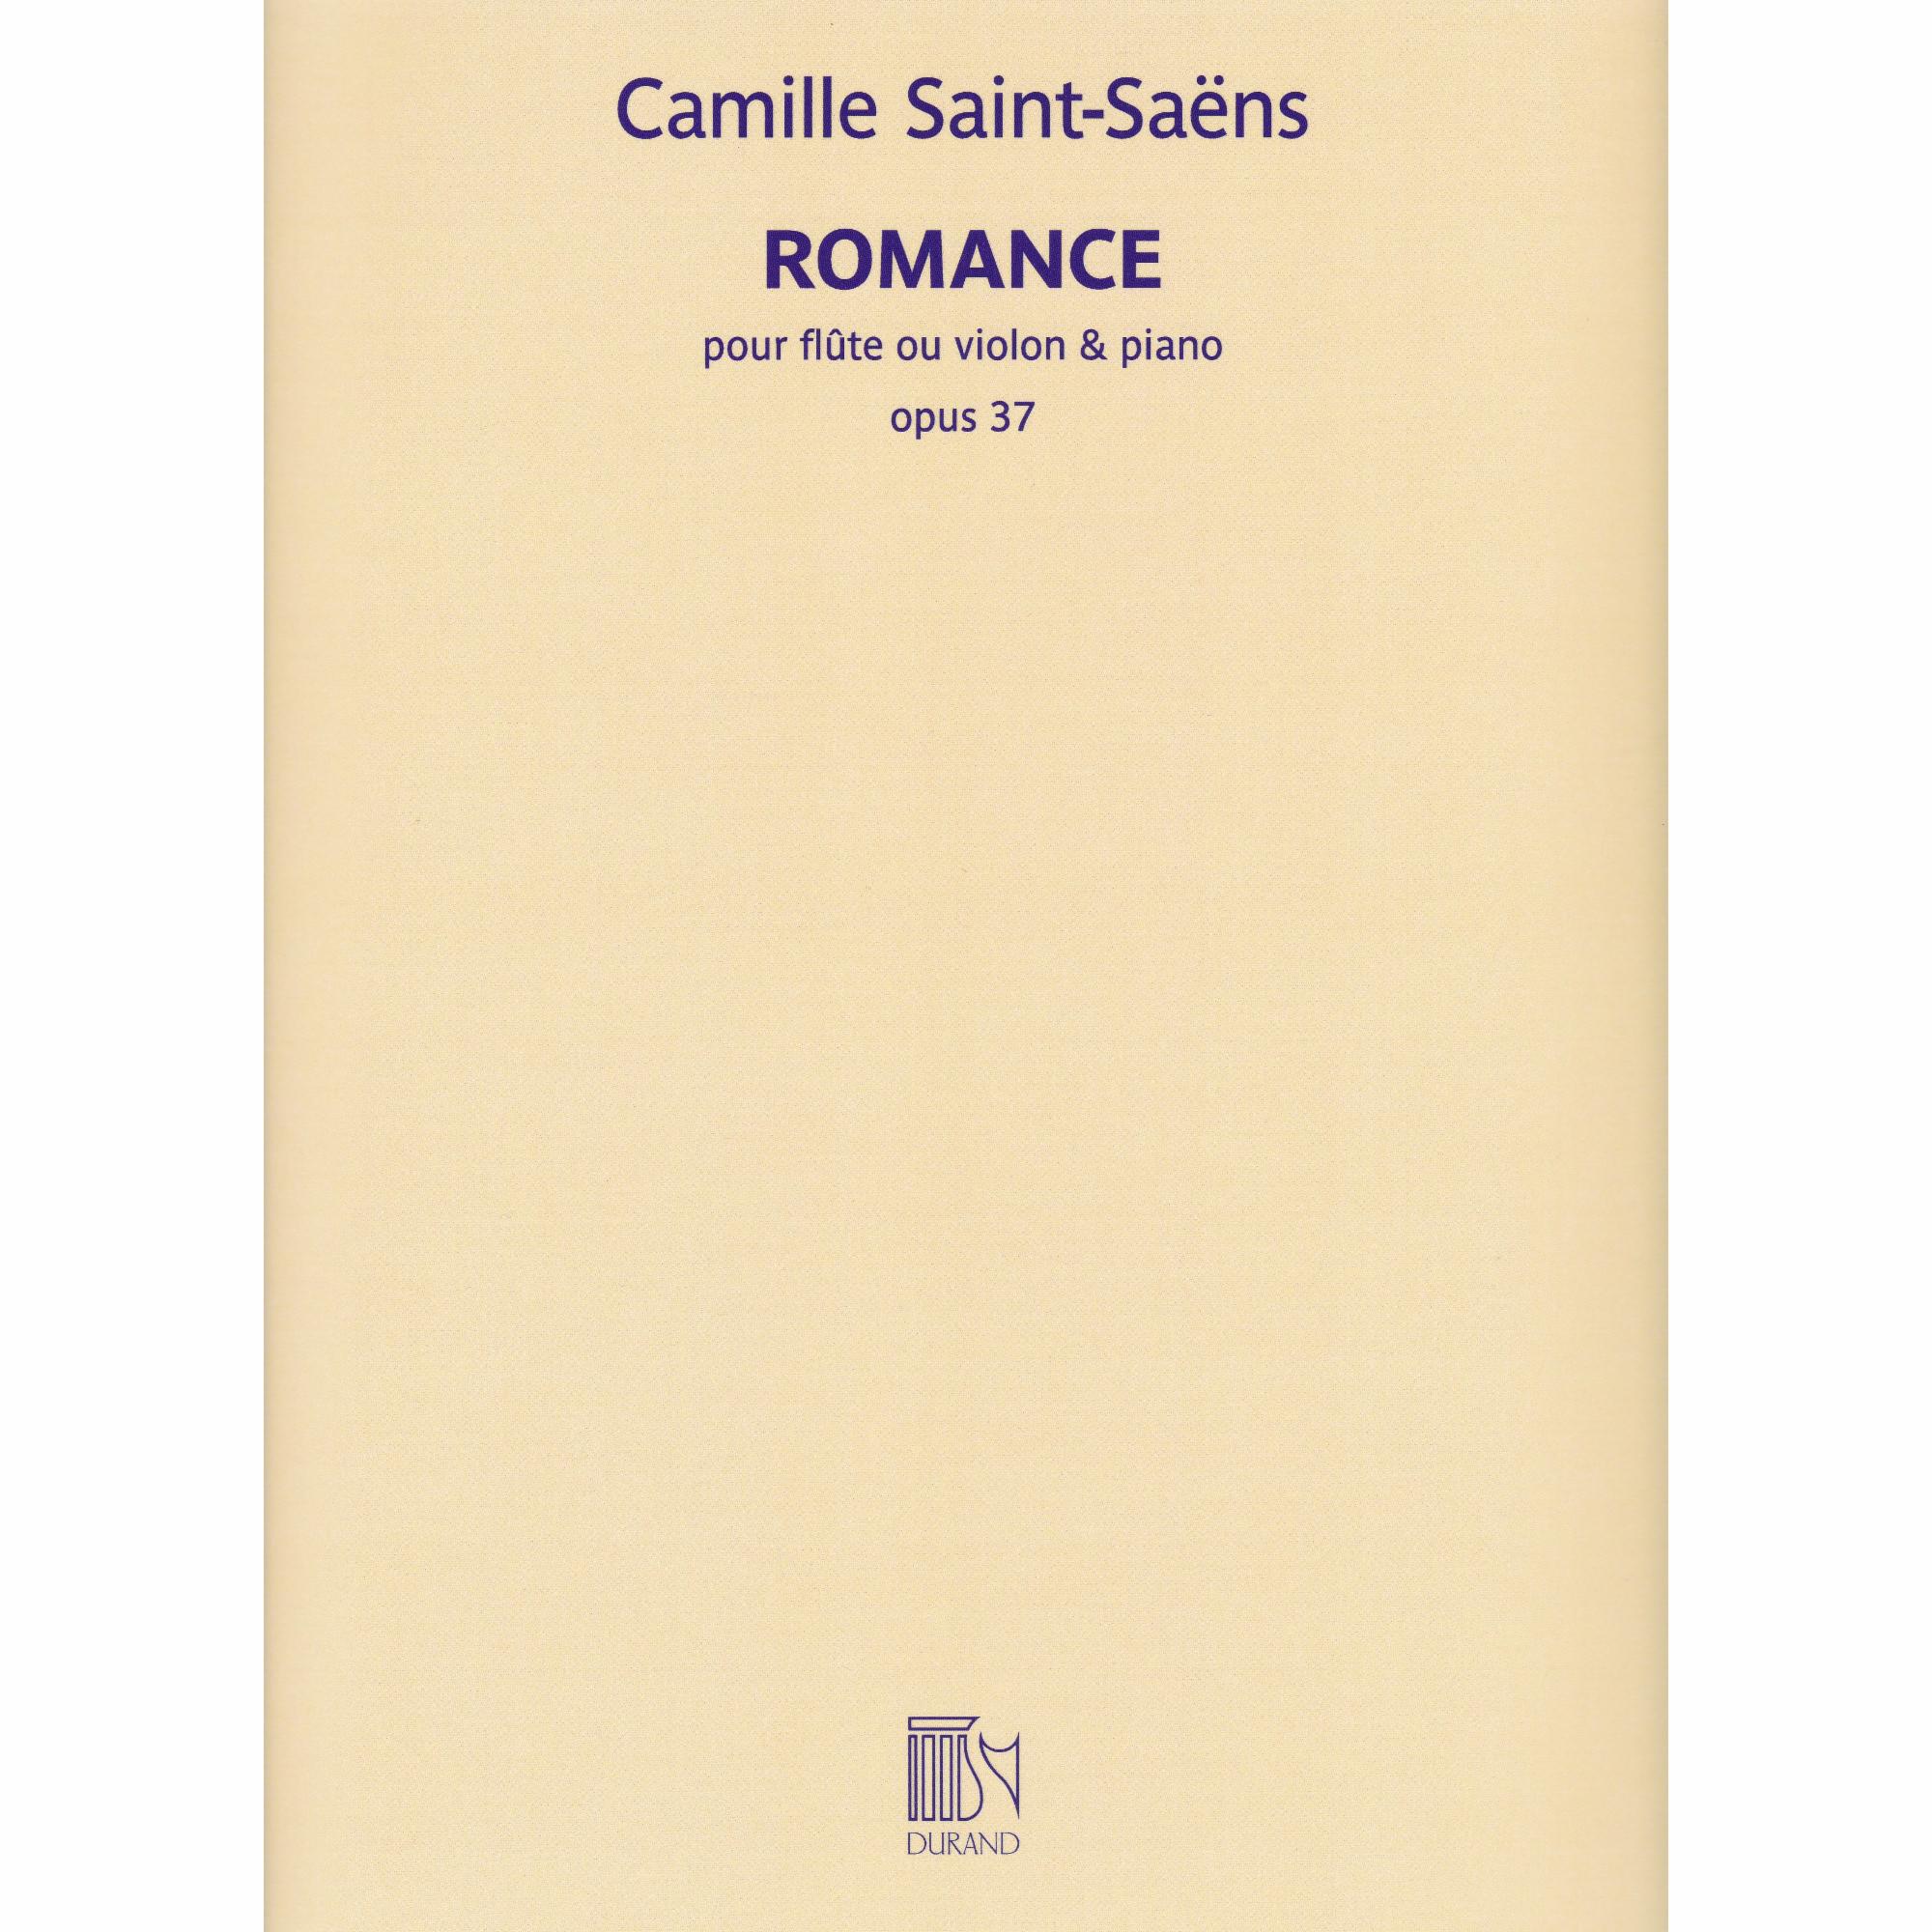 Saint-Saens -- Romance, Op. 37 for Violin and Piano